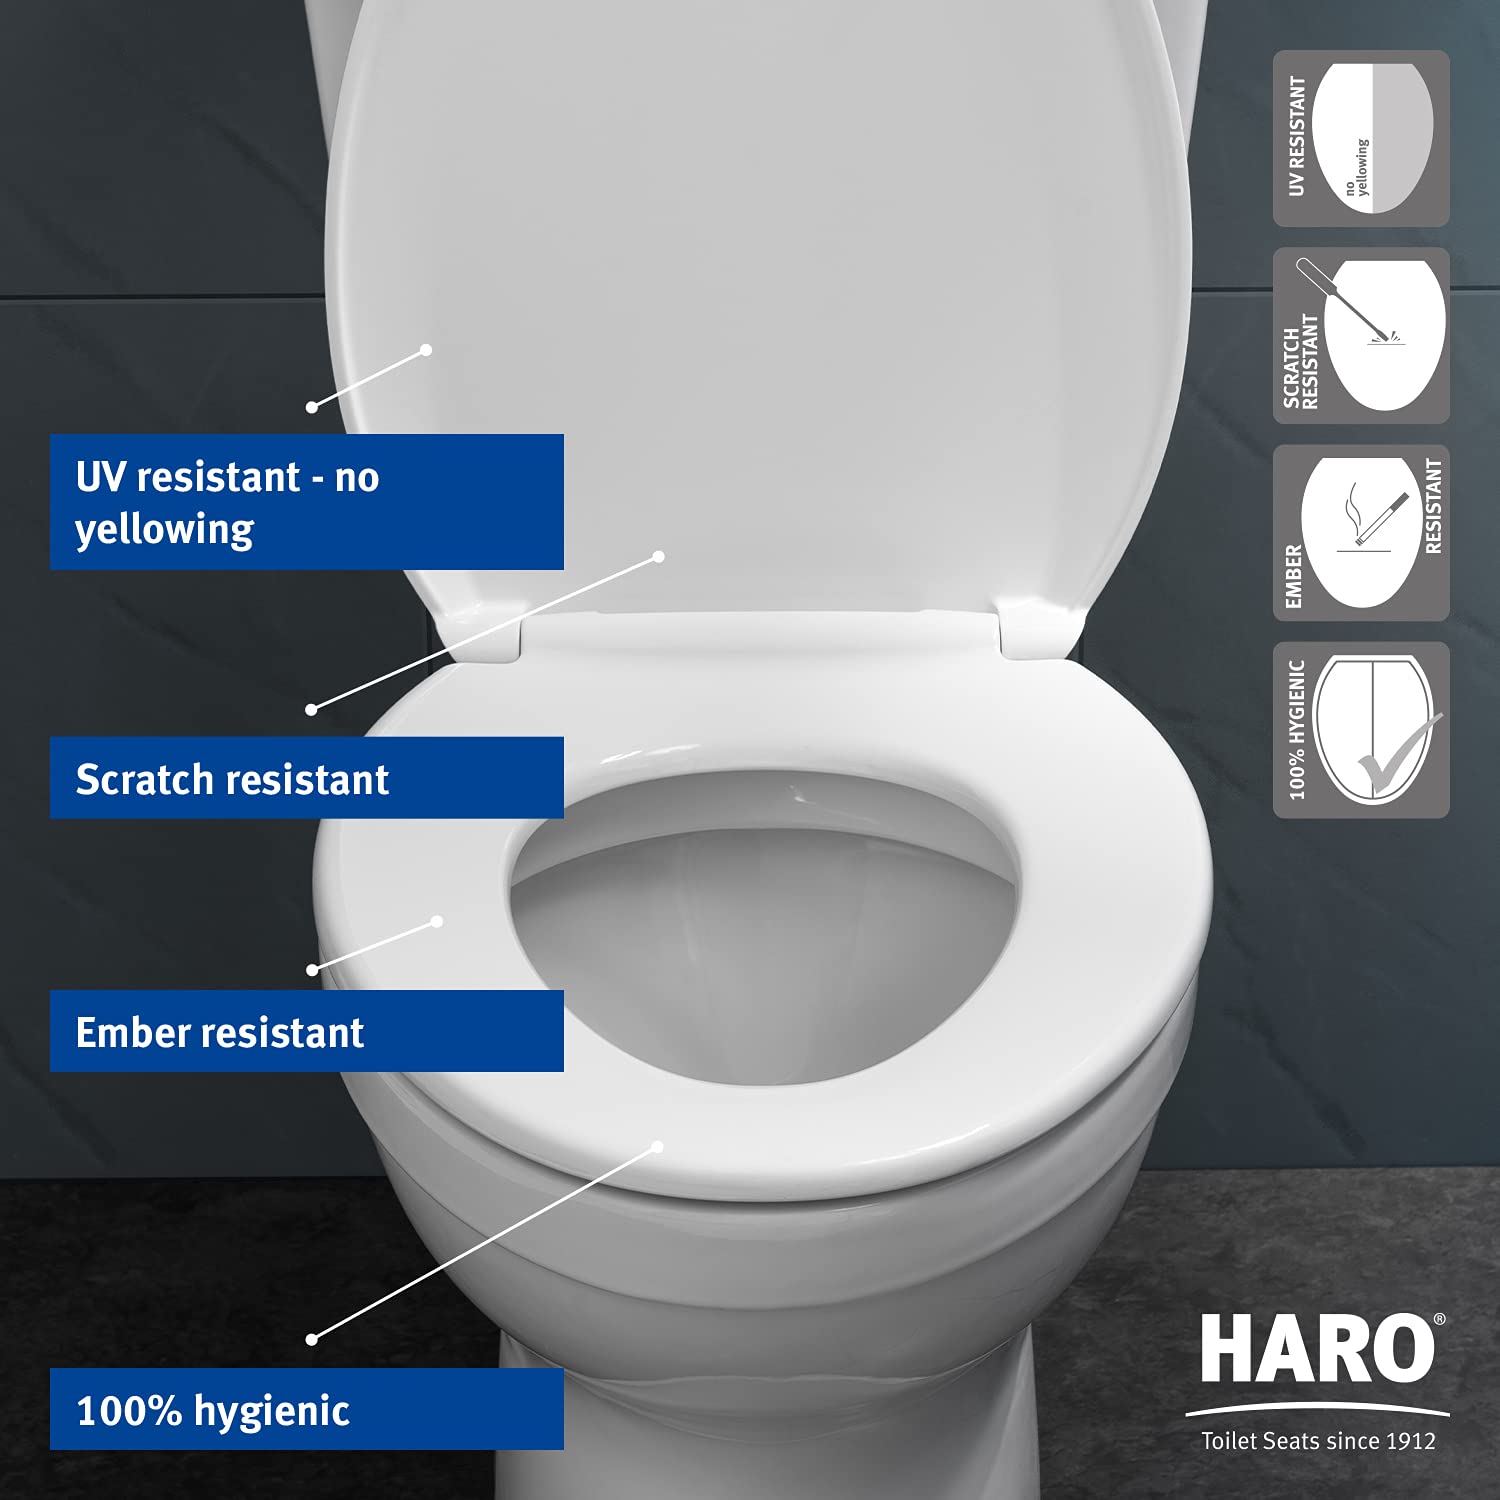 HARO | ROUND Toilet Seat | Slow-Close-Seat | Heavy-Duty up to 550 lbs, Quick-Release & Easy Clean, Fast-Fix-Hinge, No-Slip Bumpers White | Premium-Duroplast > Scratch Resistant | 16.5" x 14.5" x 2.32"